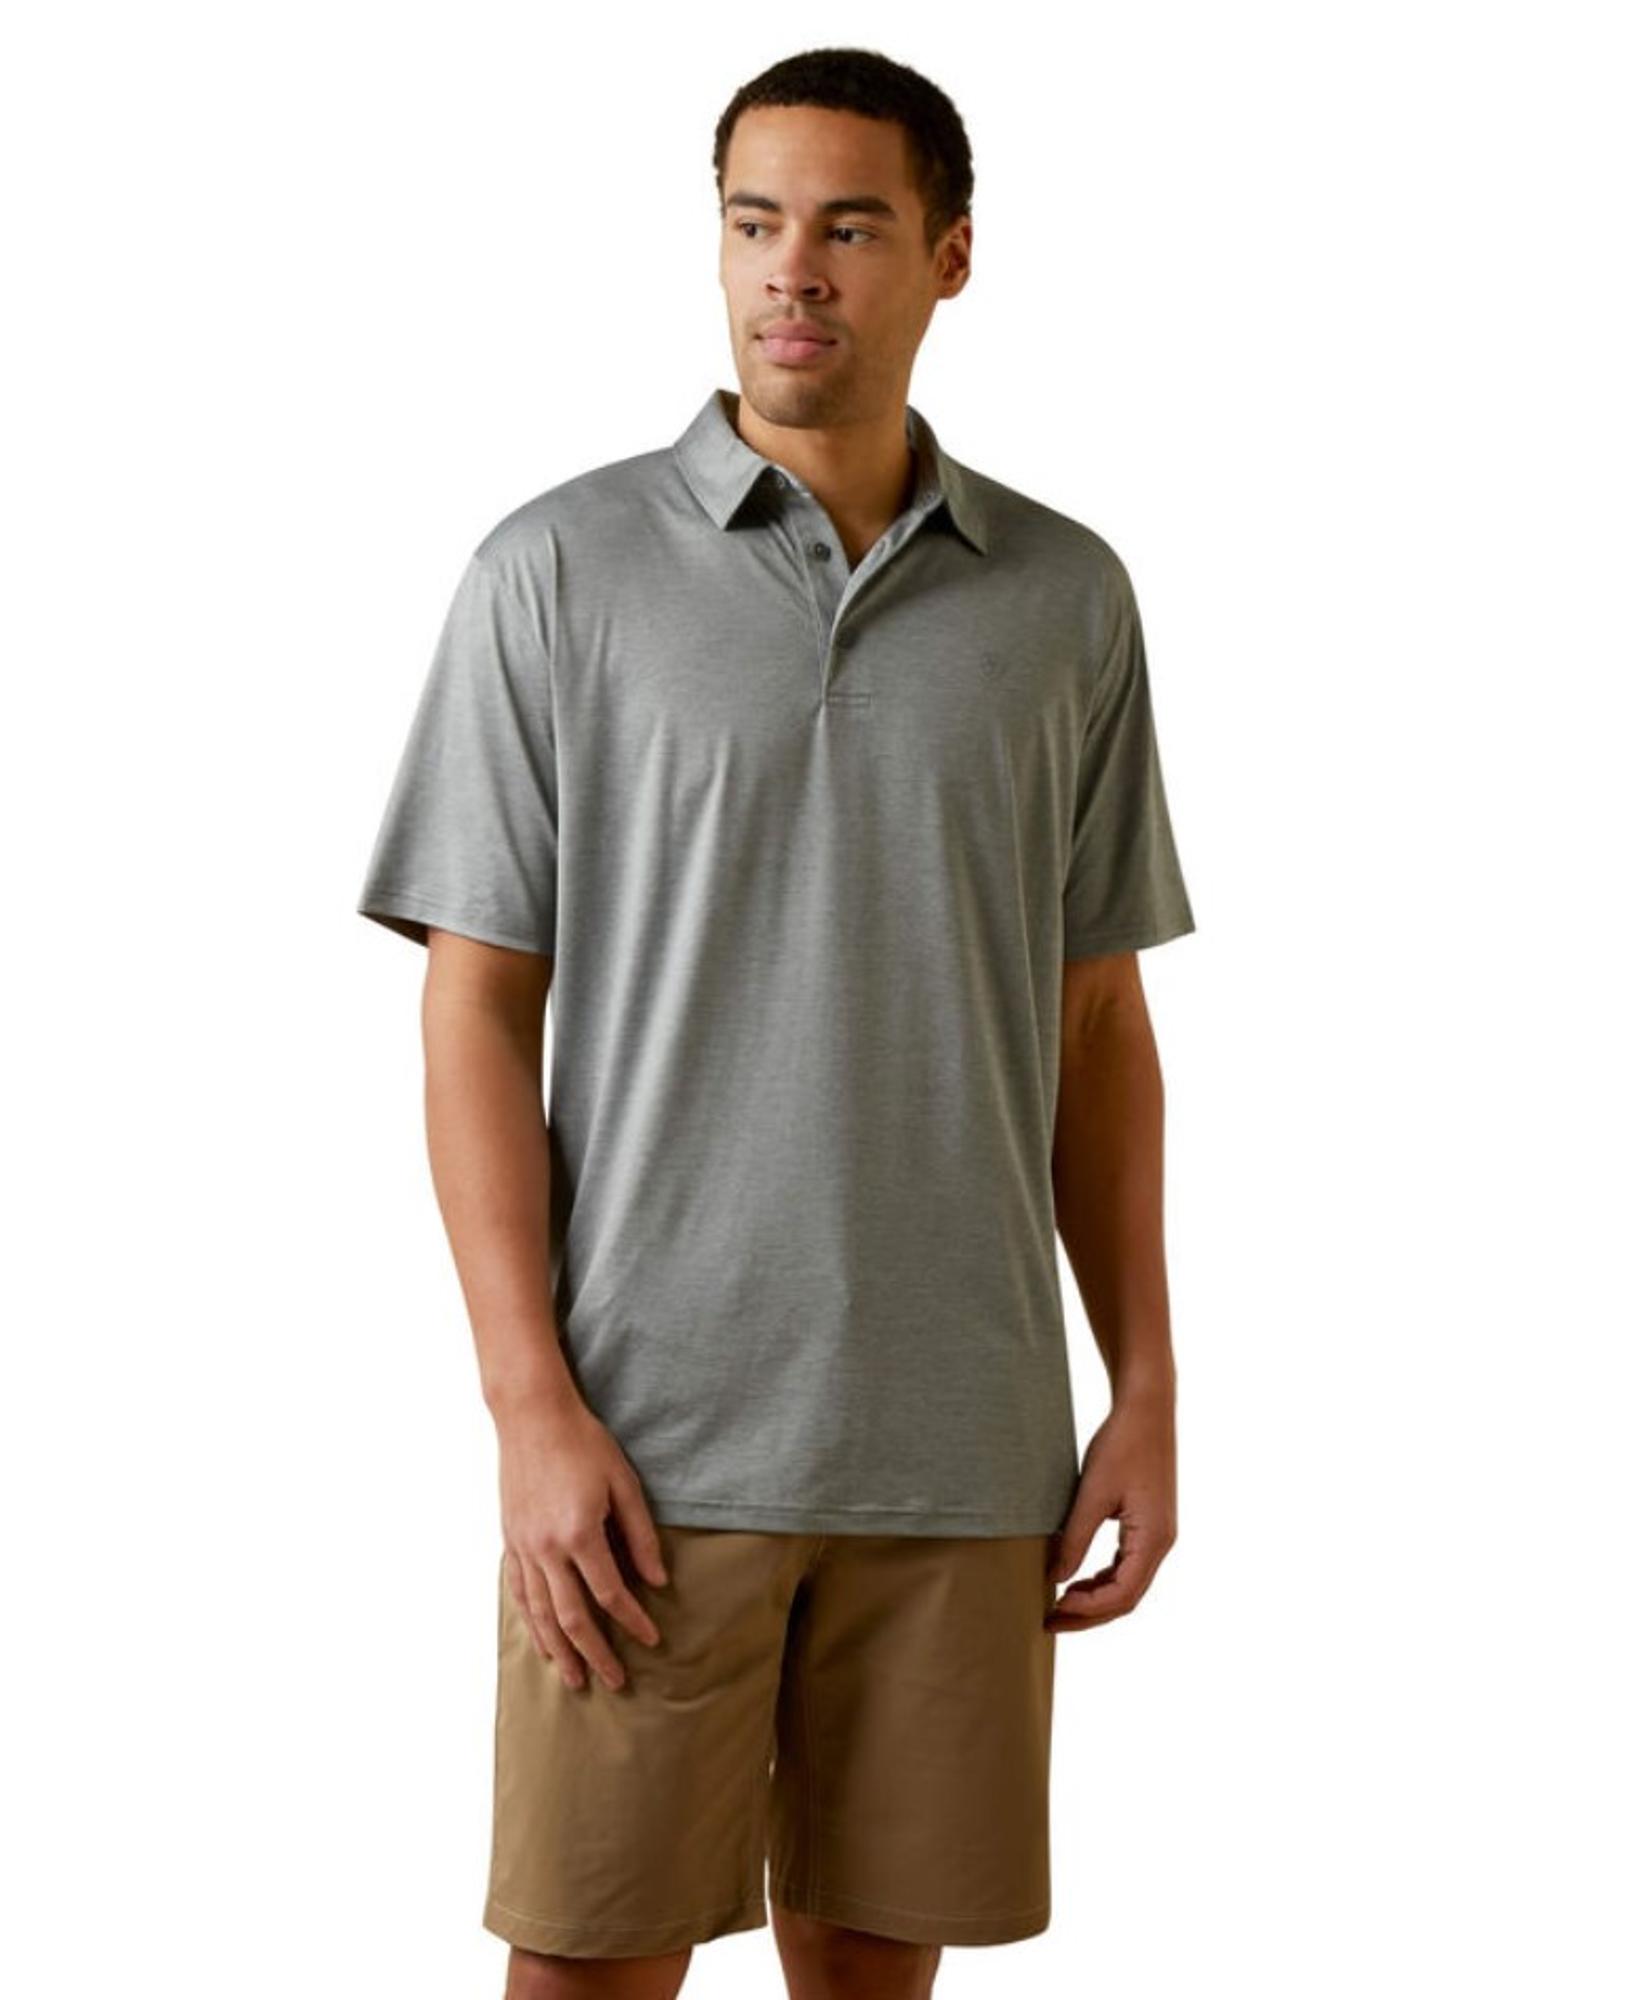 Charger 2.0 Short Sleeve Polo